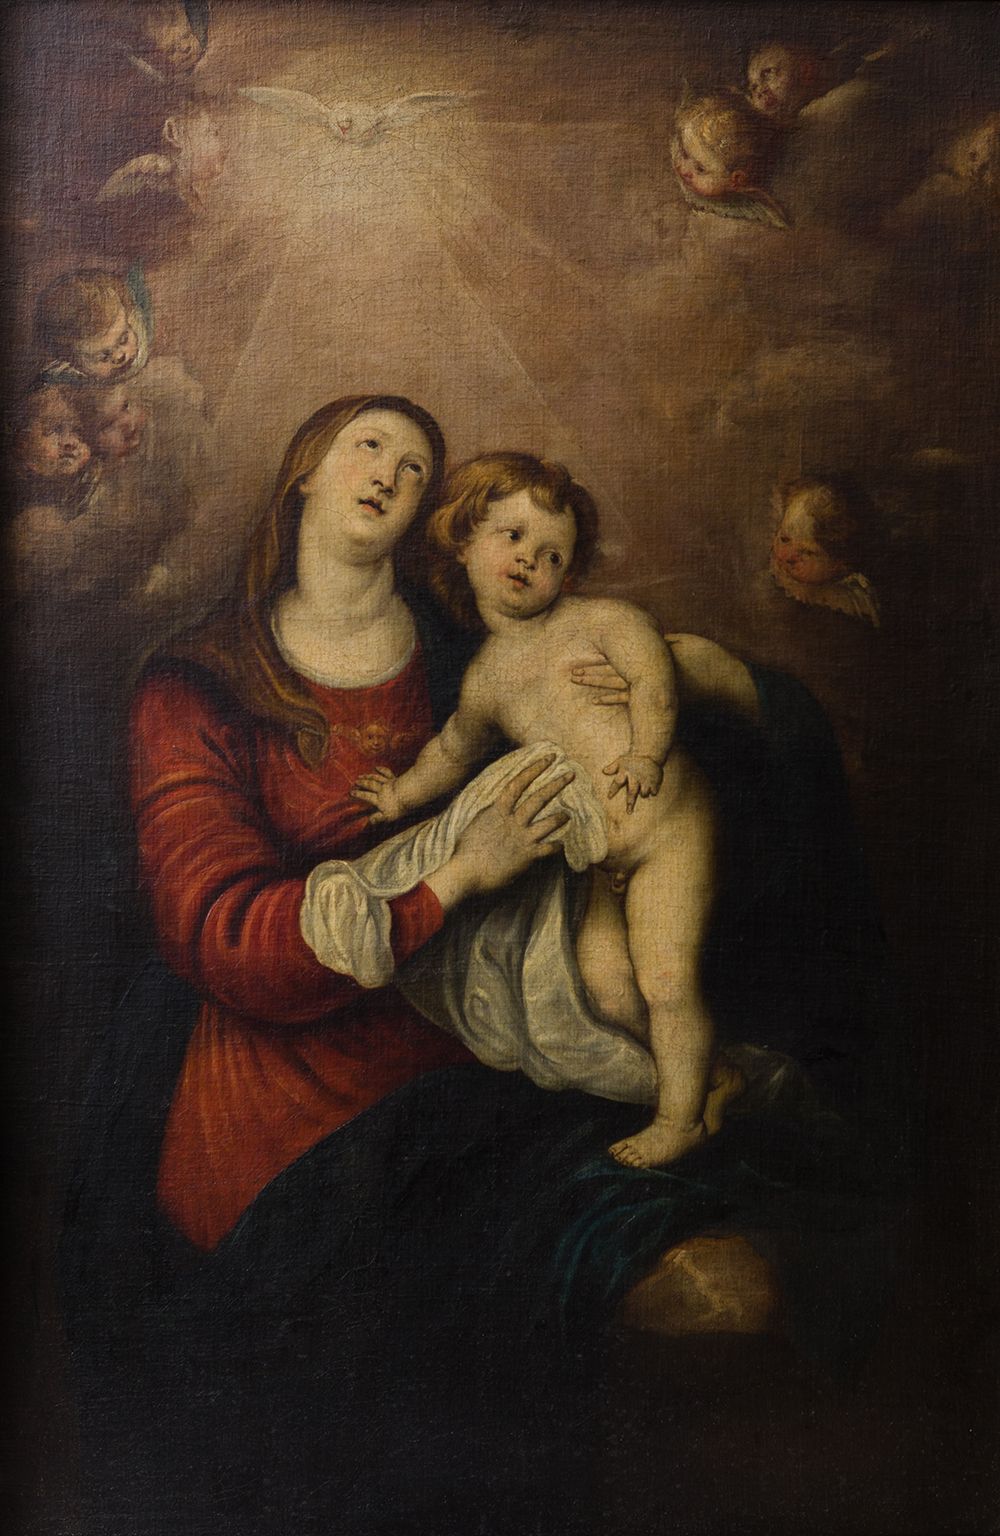 ANONYMOUS (17th century / 18th century) "Madonna and Child" Copy of the original&hellip;